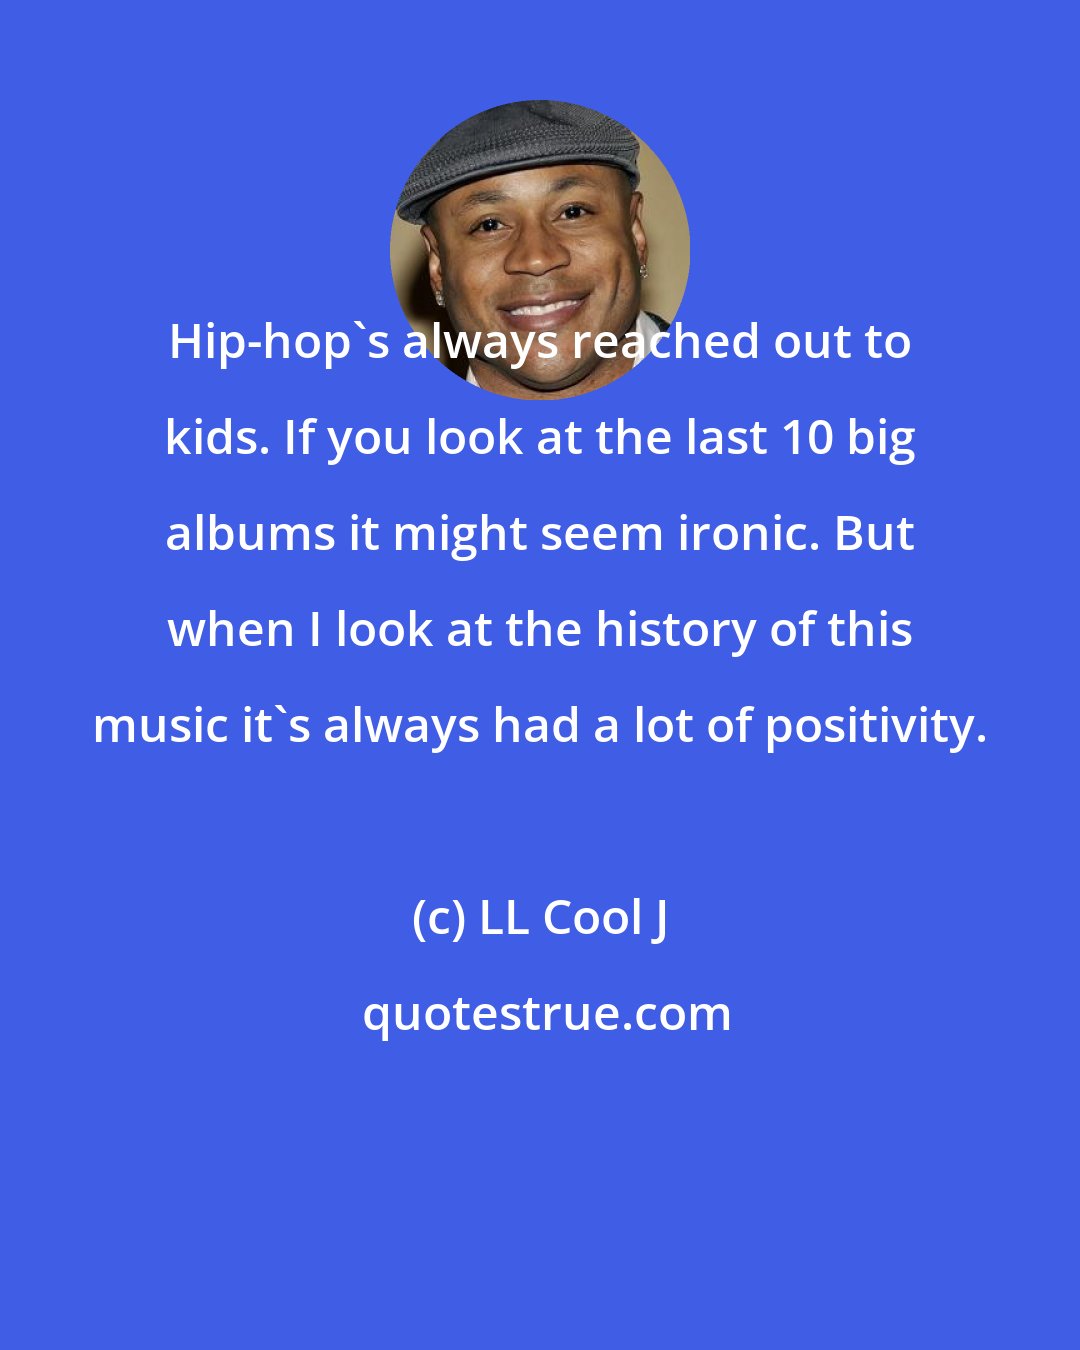 LL Cool J: Hip-hop's always reached out to kids. If you look at the last 10 big albums it might seem ironic. But when I look at the history of this music it's always had a lot of positivity.